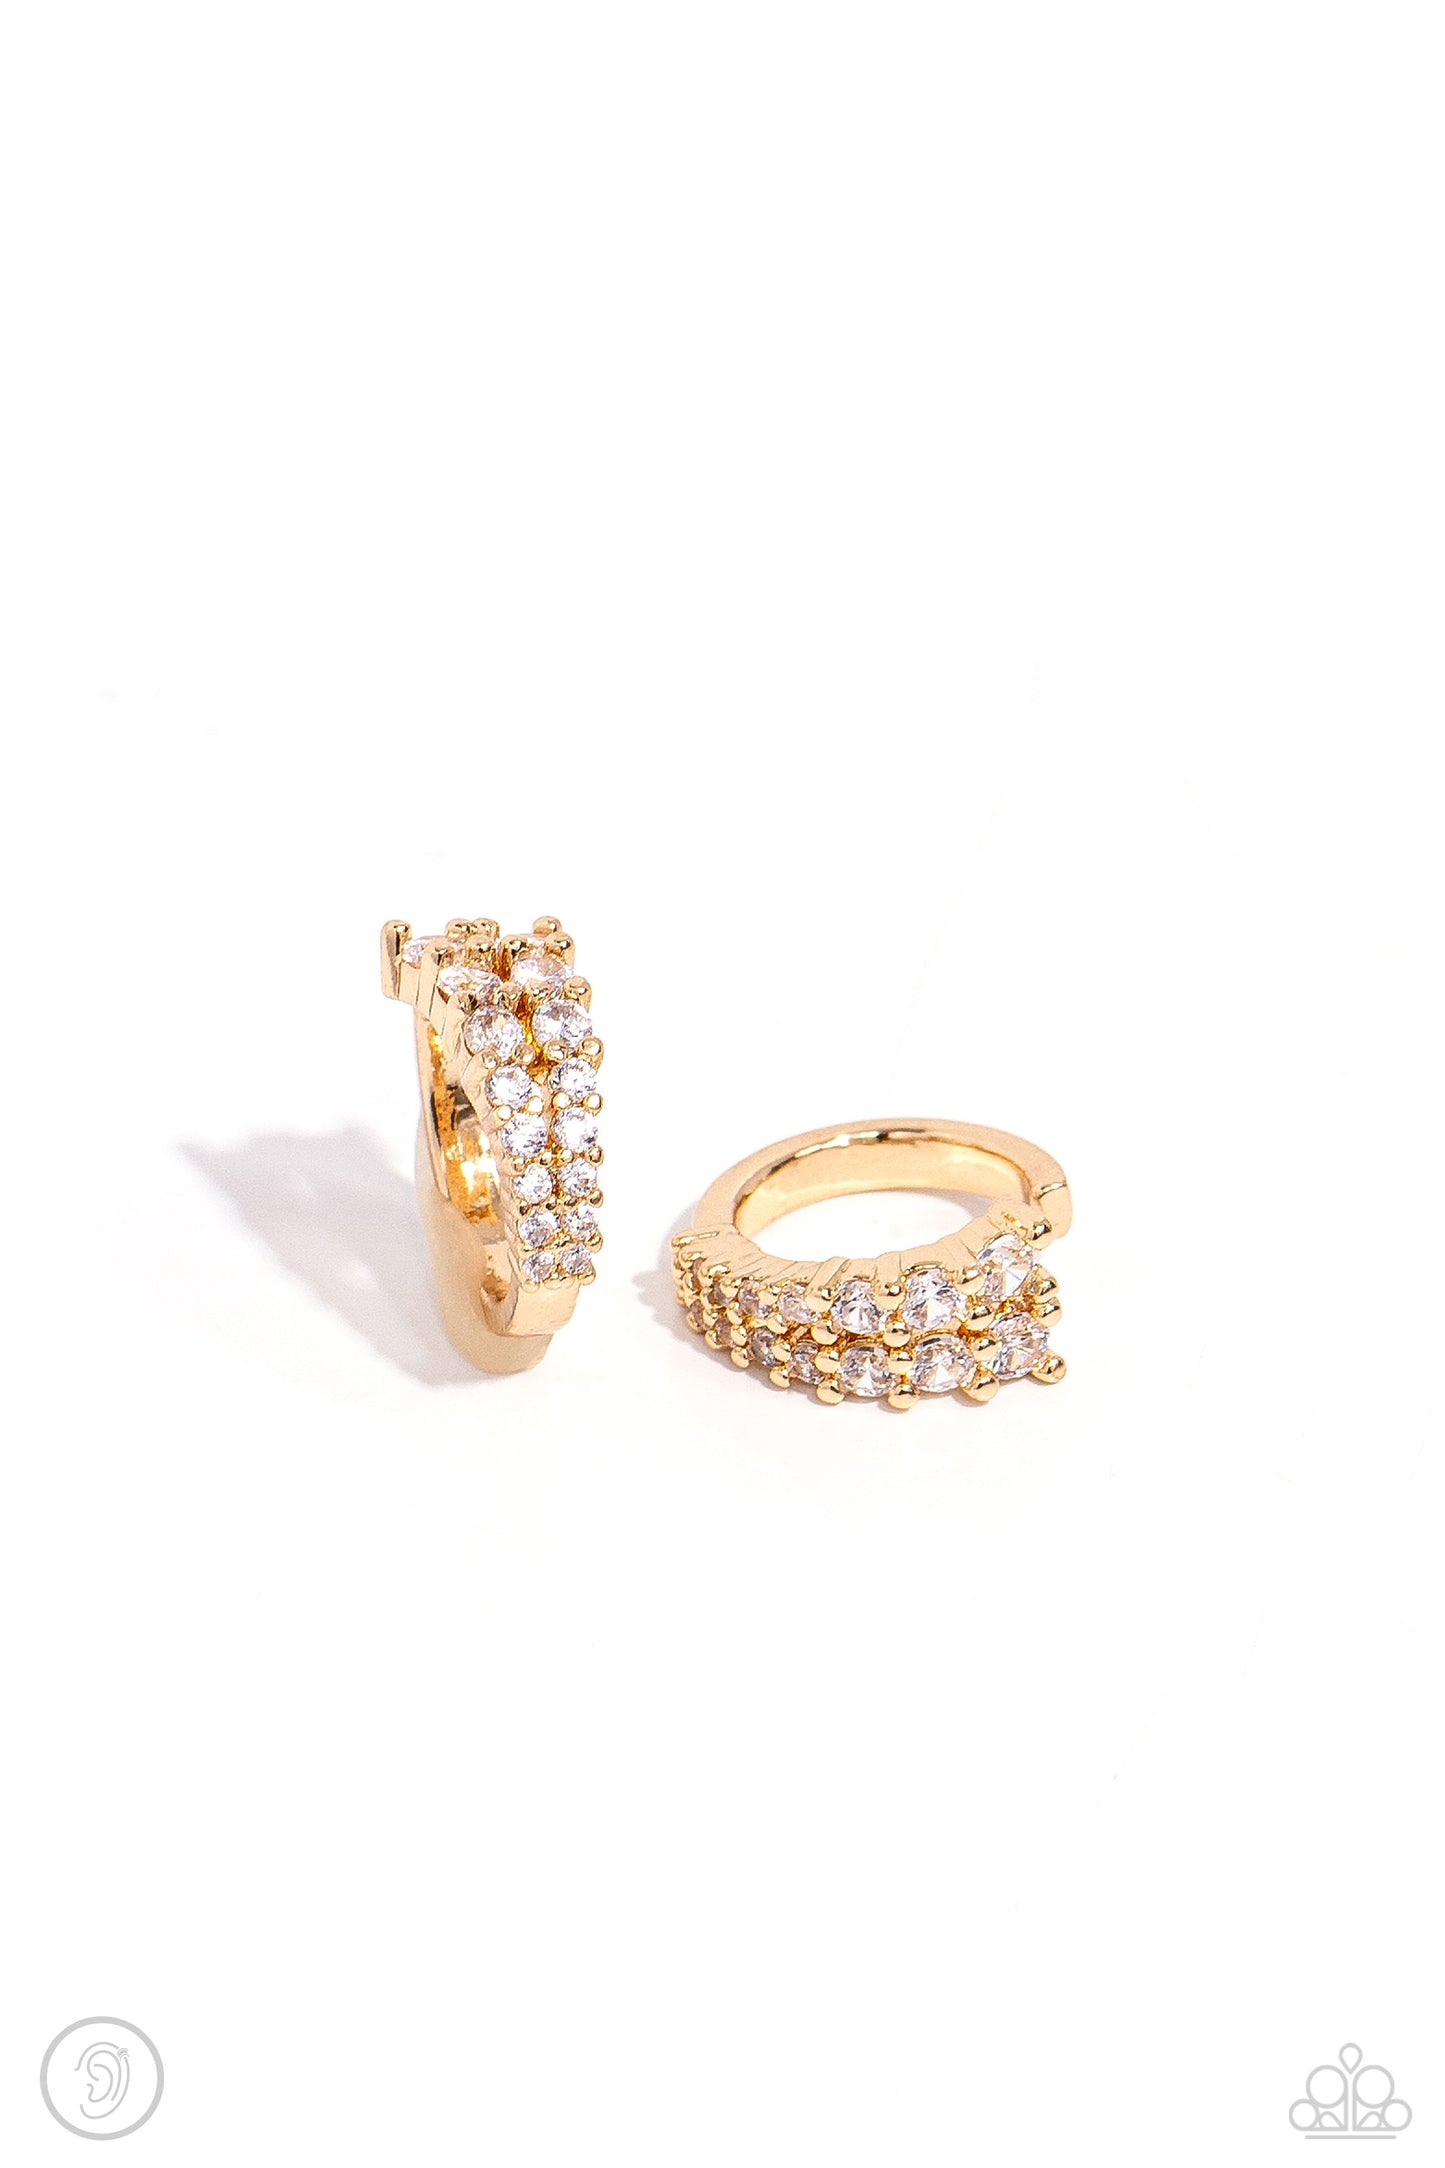 Paparazzi Accessories - Pronged Parisian - Gold Ear Cuff Earrings featuring a two-pronged gold fitting, white rhinestones gradually decrease in size to create a blinding, adjustable, one-size-fits-all cuff.  Sold as one pair of cuff earrings.